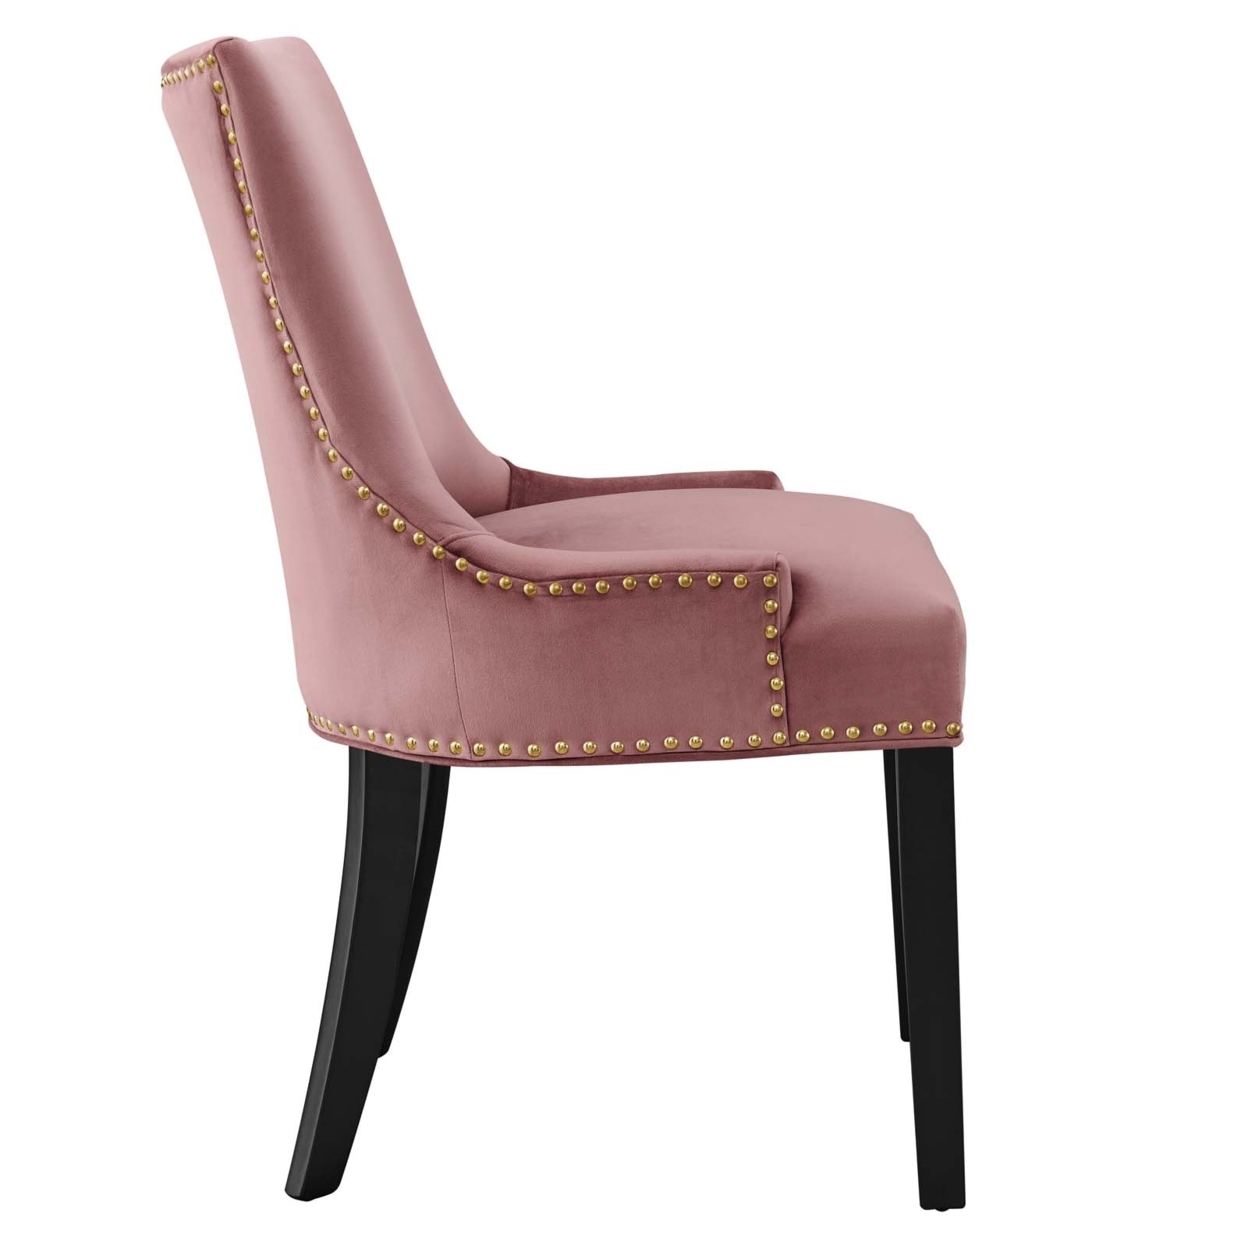 Marquis Performance Velvet Dining Chairs - Set Of 2, Dusty Rose